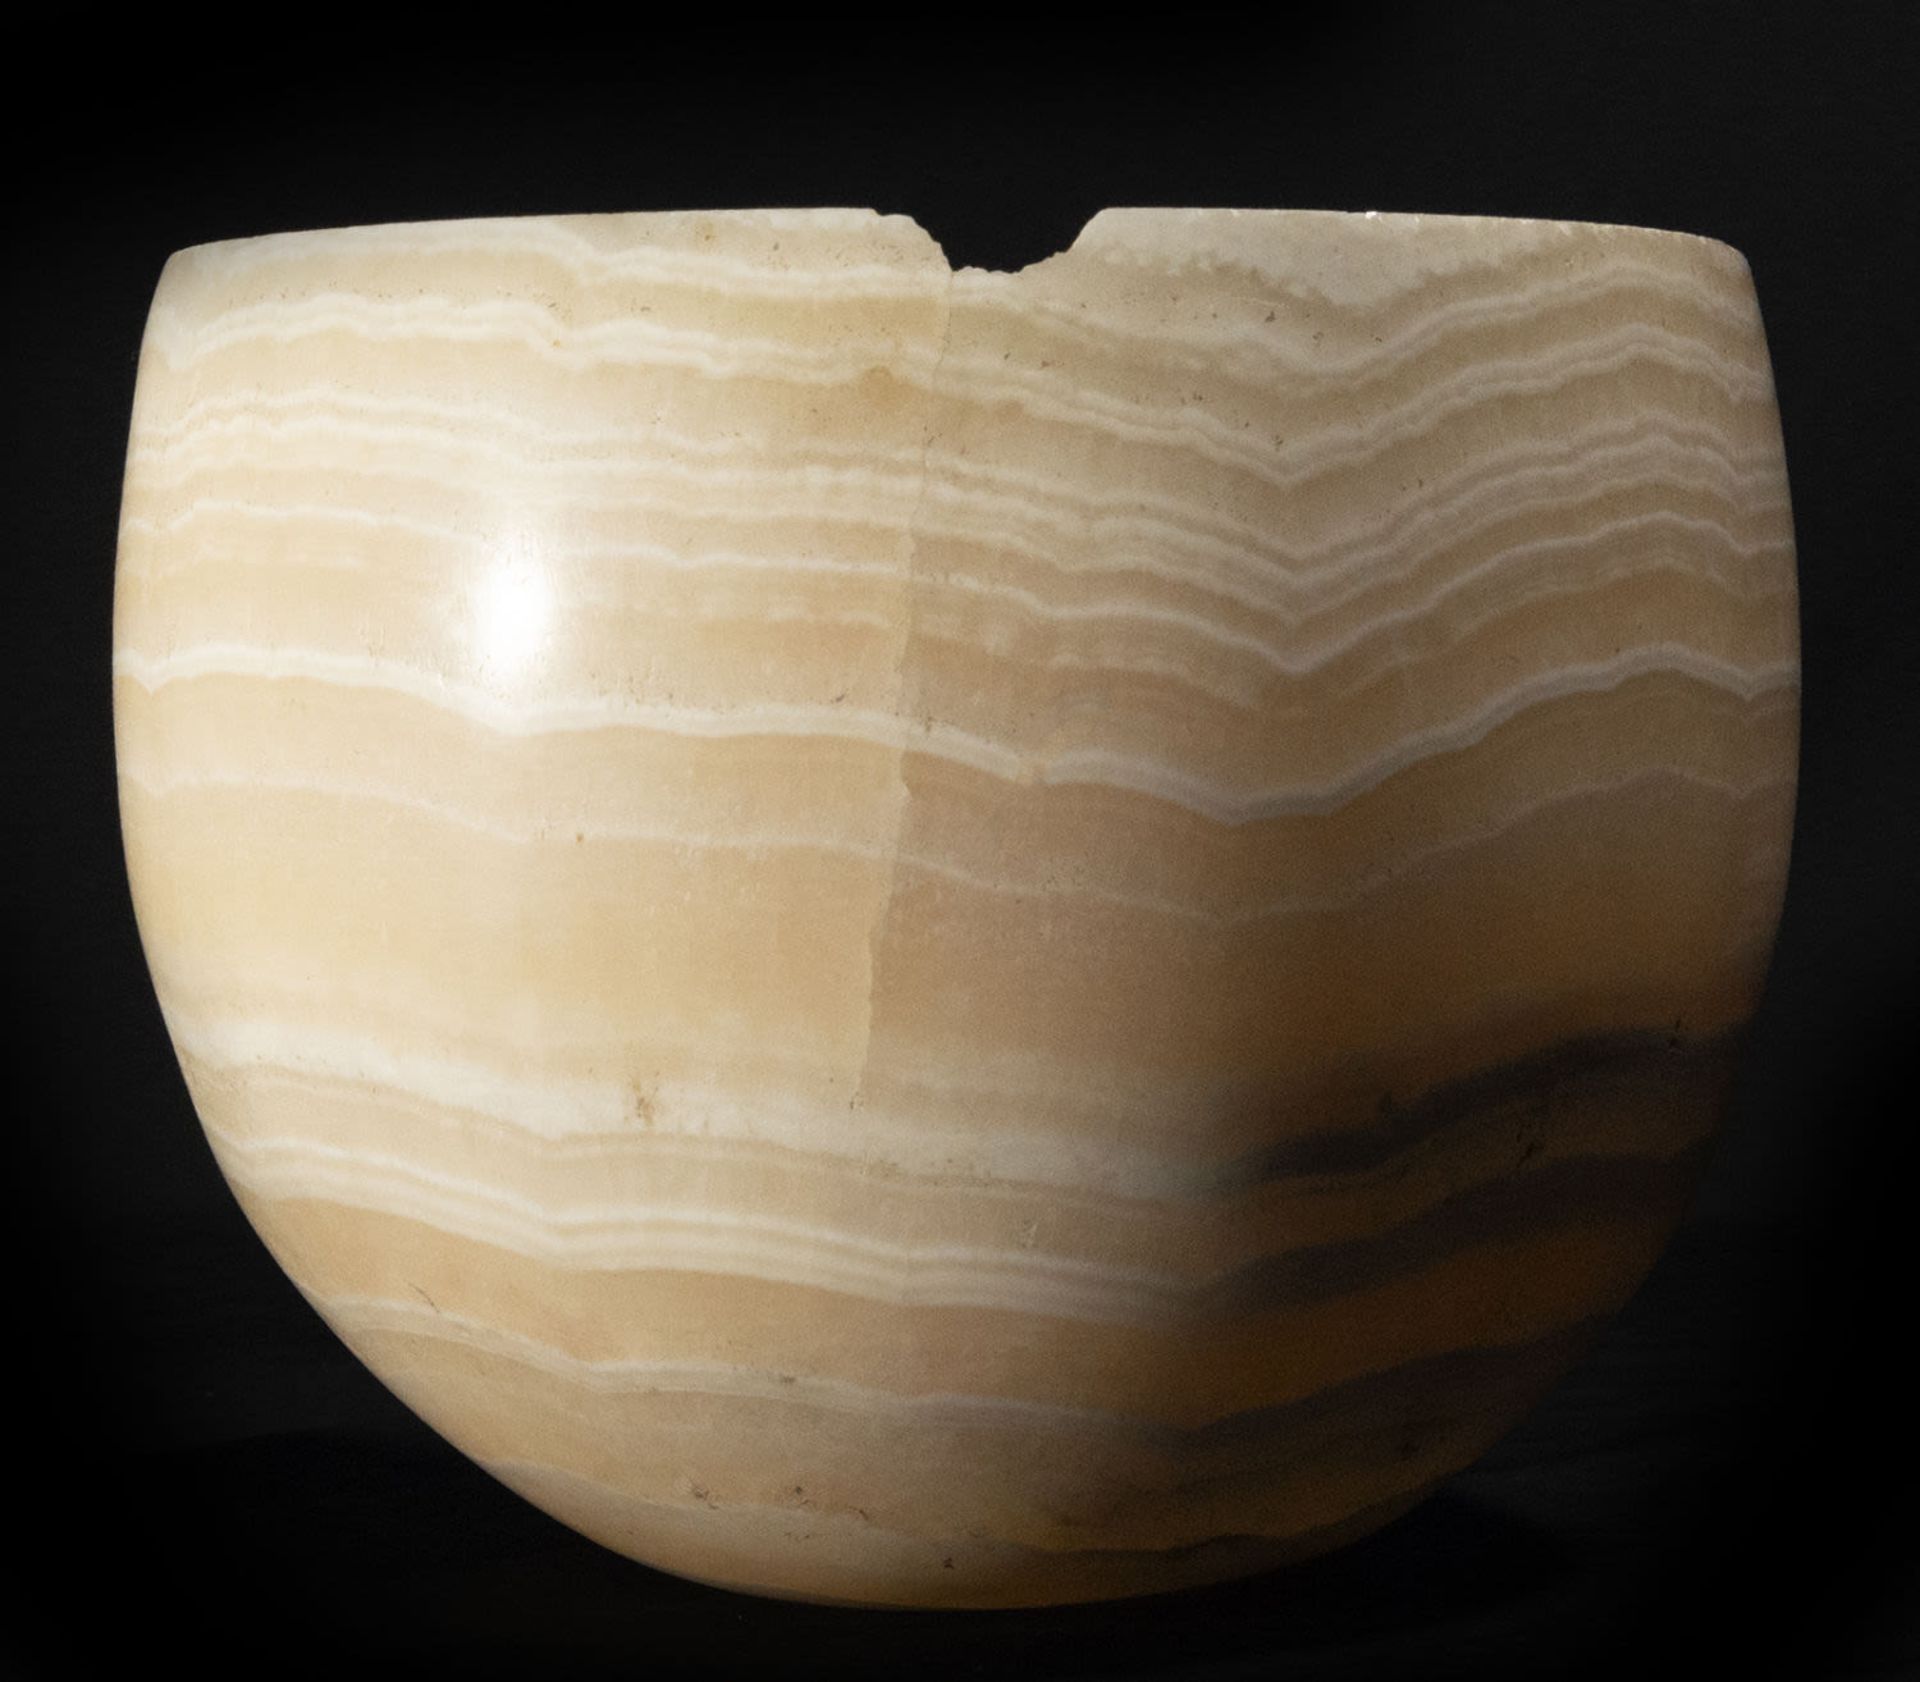 Egyptian Canopic Vase in Onyx, Late Egyptian Empire (656-332 BC), Late Empire period, Egypt - Image 3 of 3